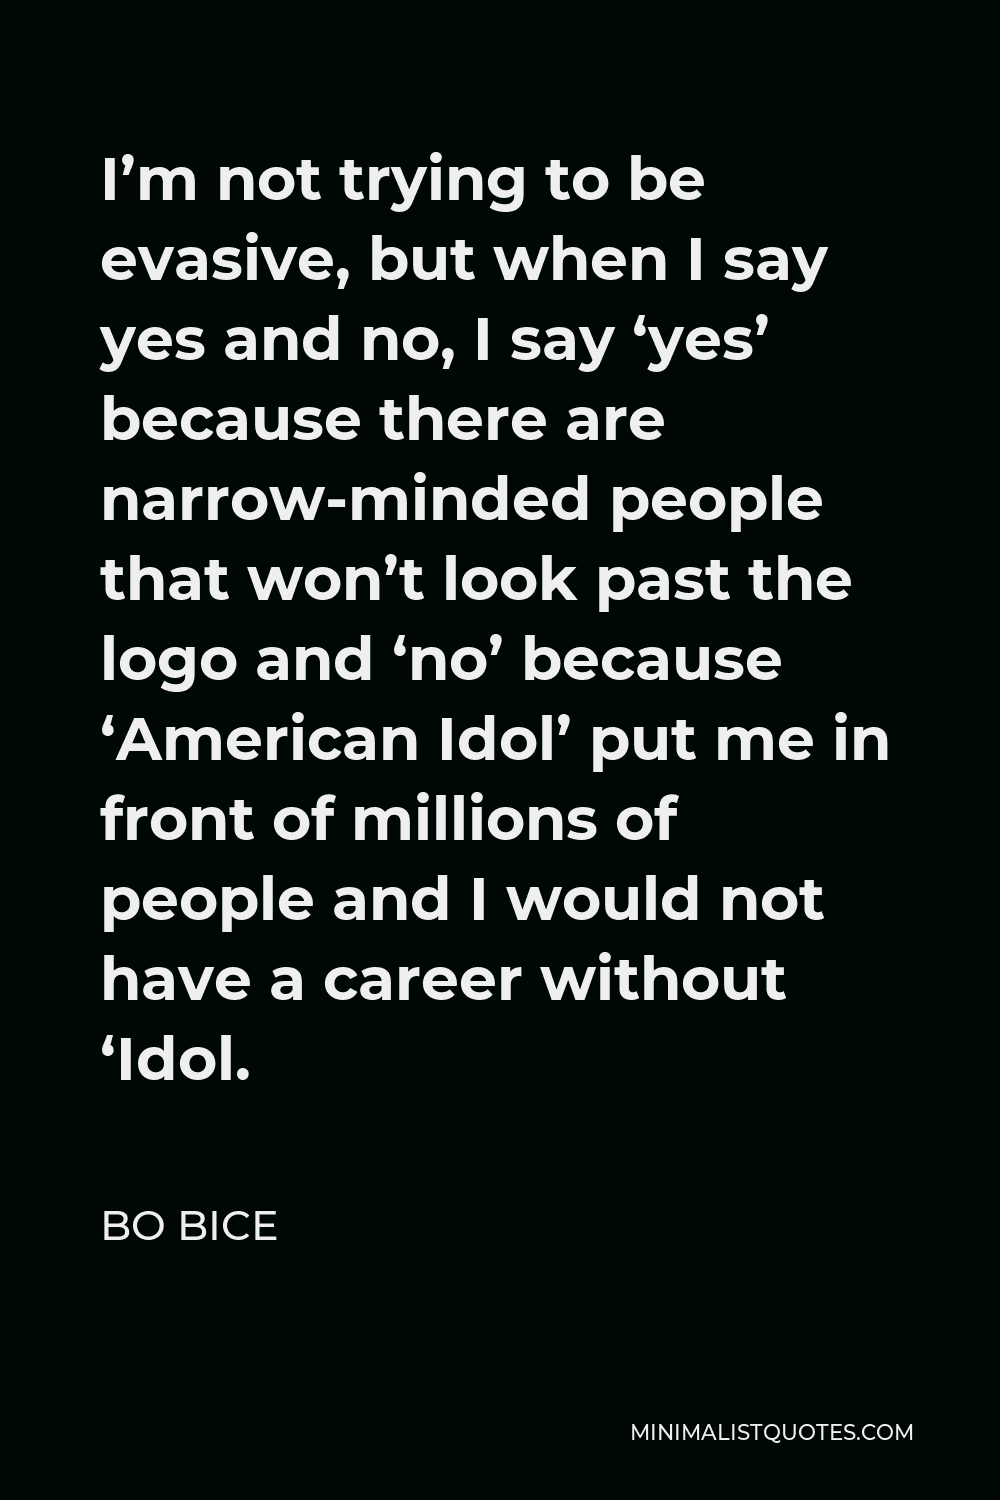 Bo Bice Quote - I’m not trying to be evasive, but when I say yes and no, I say ‘yes’ because there are narrow-minded people that won’t look past the logo and ‘no’ because ‘American Idol’ put me in front of millions of people and I would not have a career without ‘Idol.